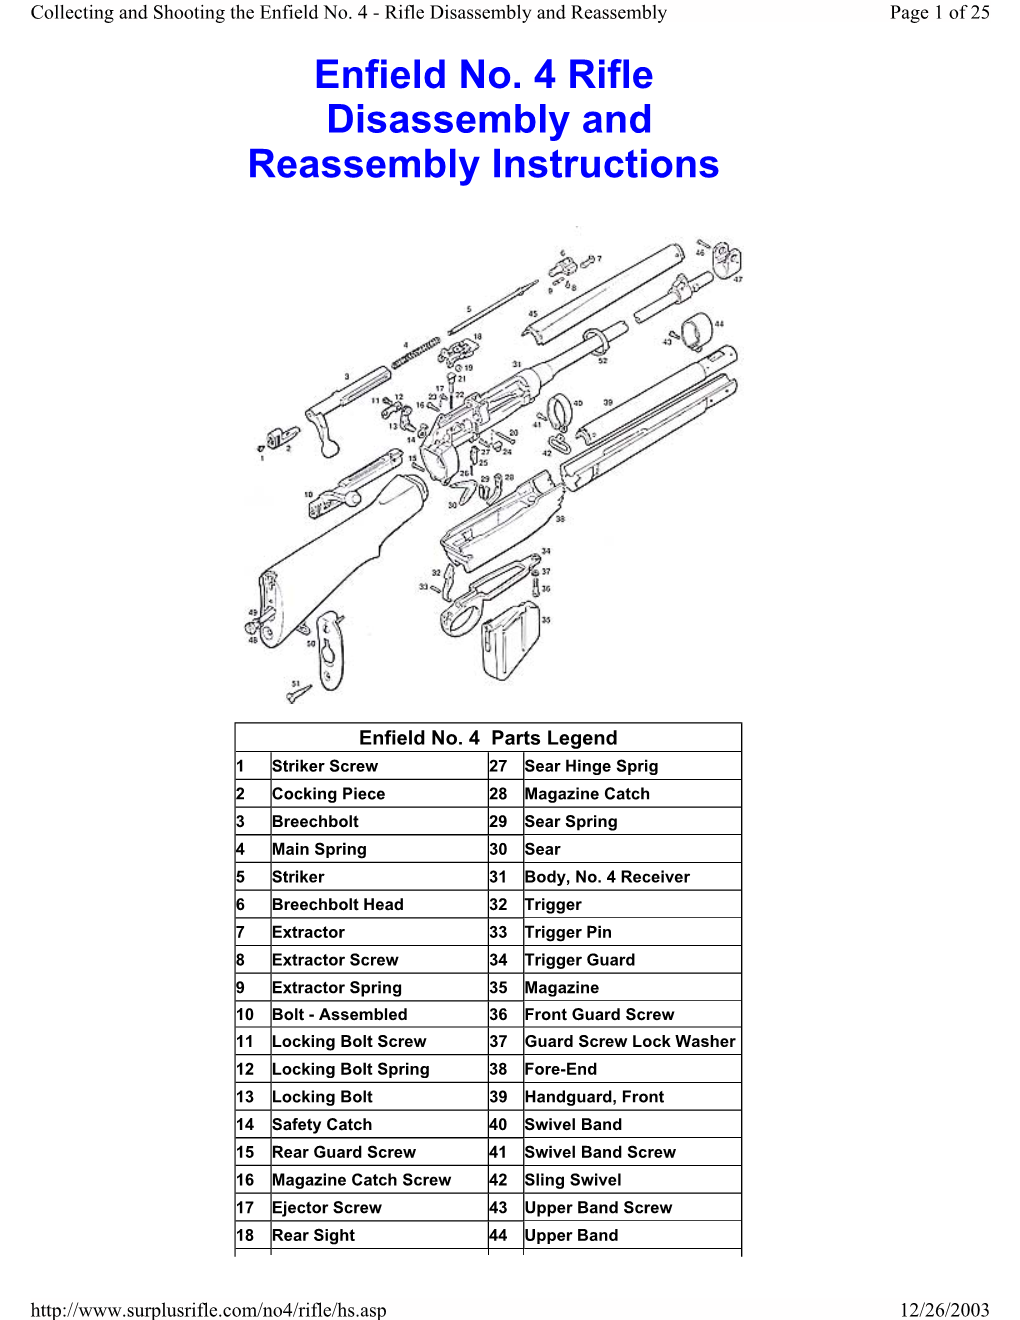 Enfield No. 4 Rifle Disassembly and Reassembly Instructions